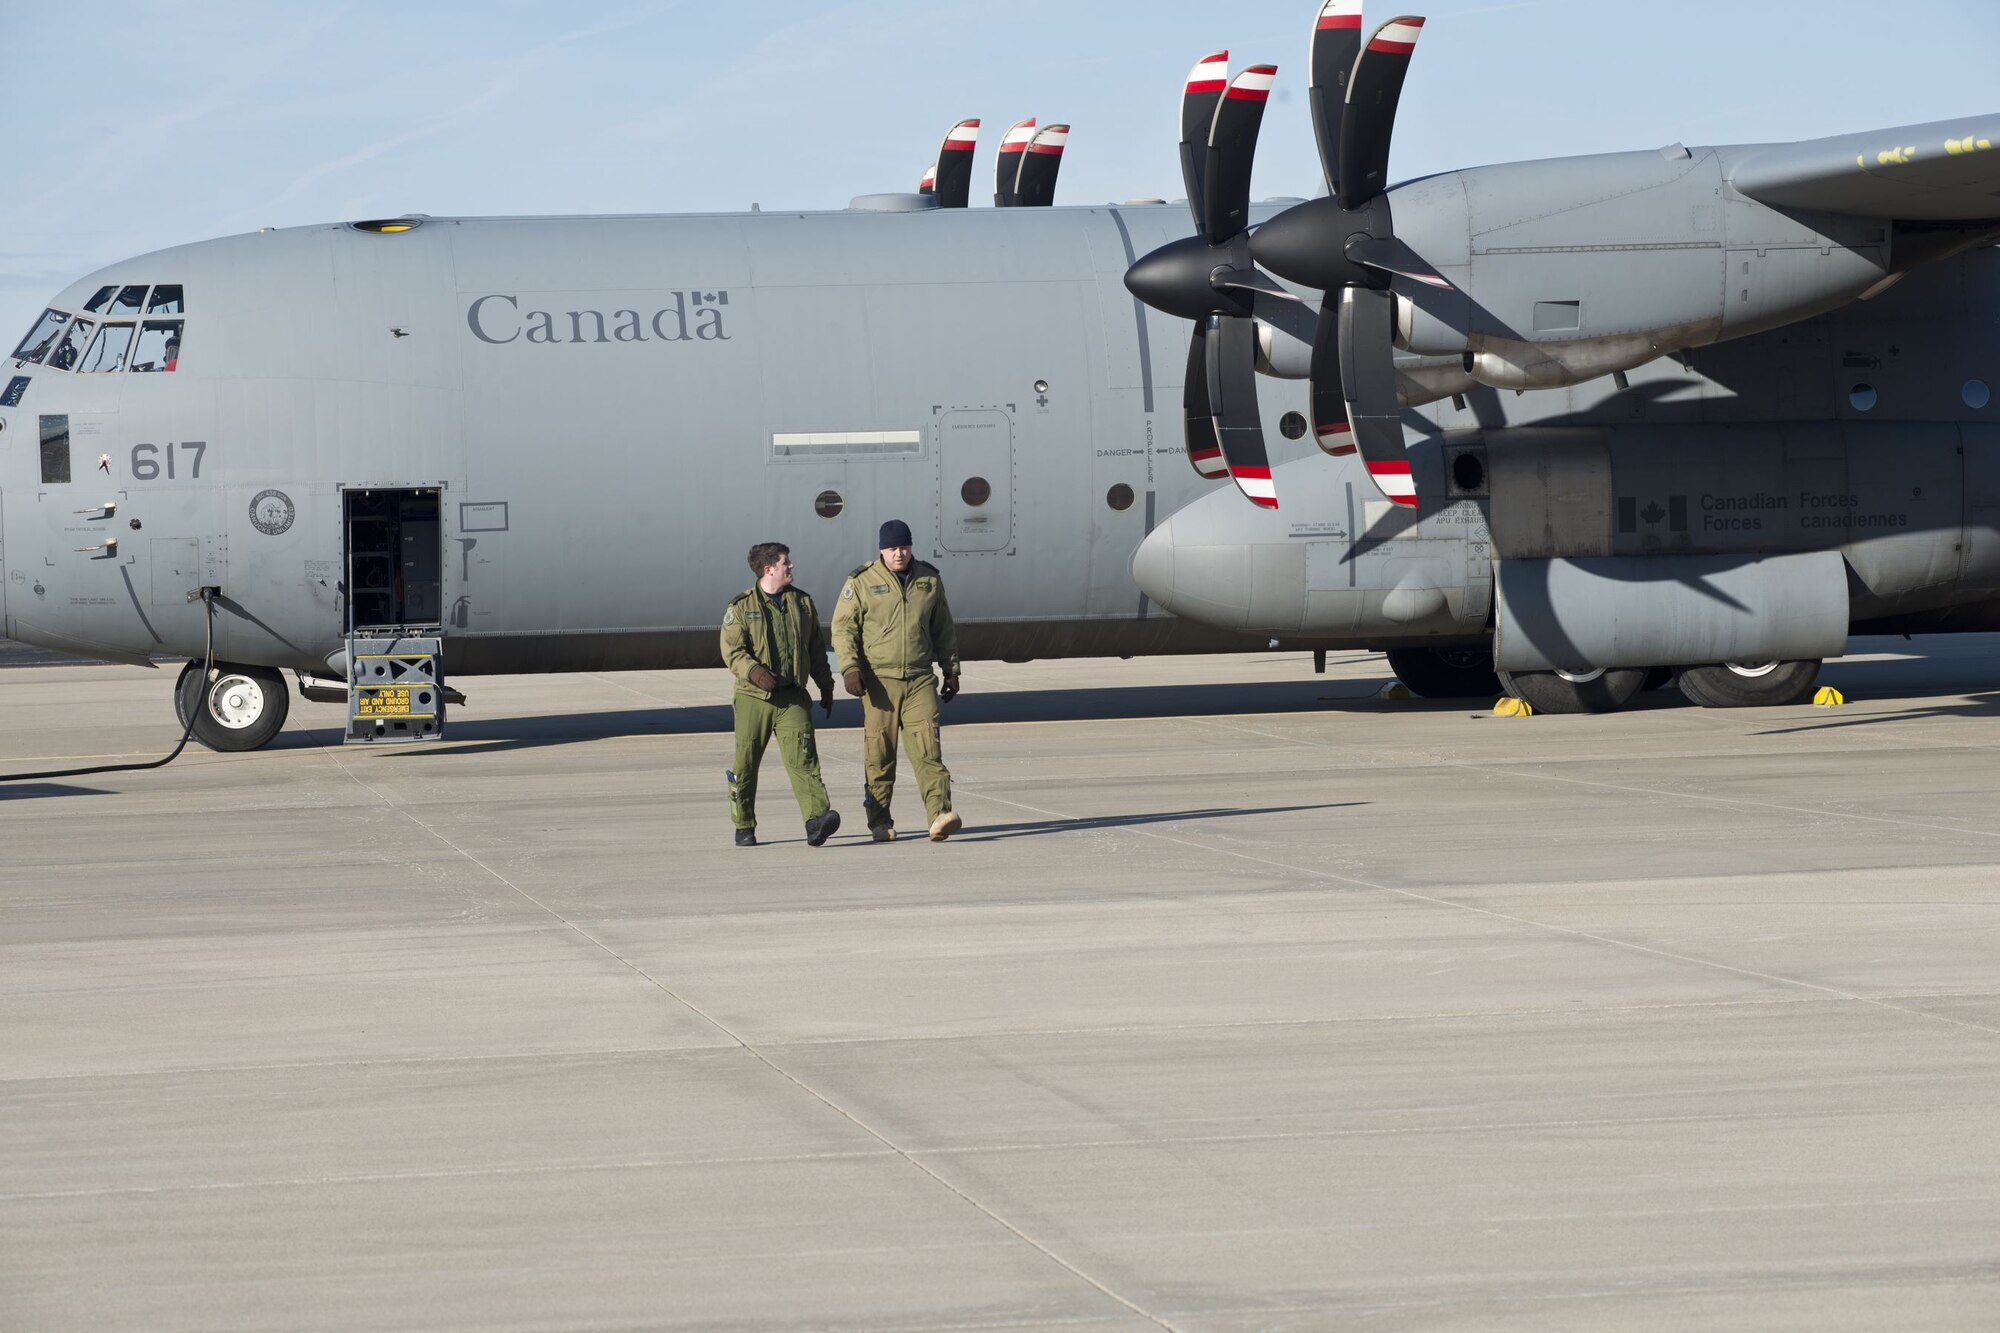 Royal Canadian Air Force members prepare their CC-130J aircraft for a Treaty on Open Skiestraining sortie at Rosecrans Memorial Airport, St. Joesph, Mo. February 2, 2018. Personnel from the United States, Canada, United Kingdom, France and the Czech Republic participated in the flight designed to promote international cooperation and transparency. (U.S. Air National Guard photo/Tech. Sgt. John Hillier)